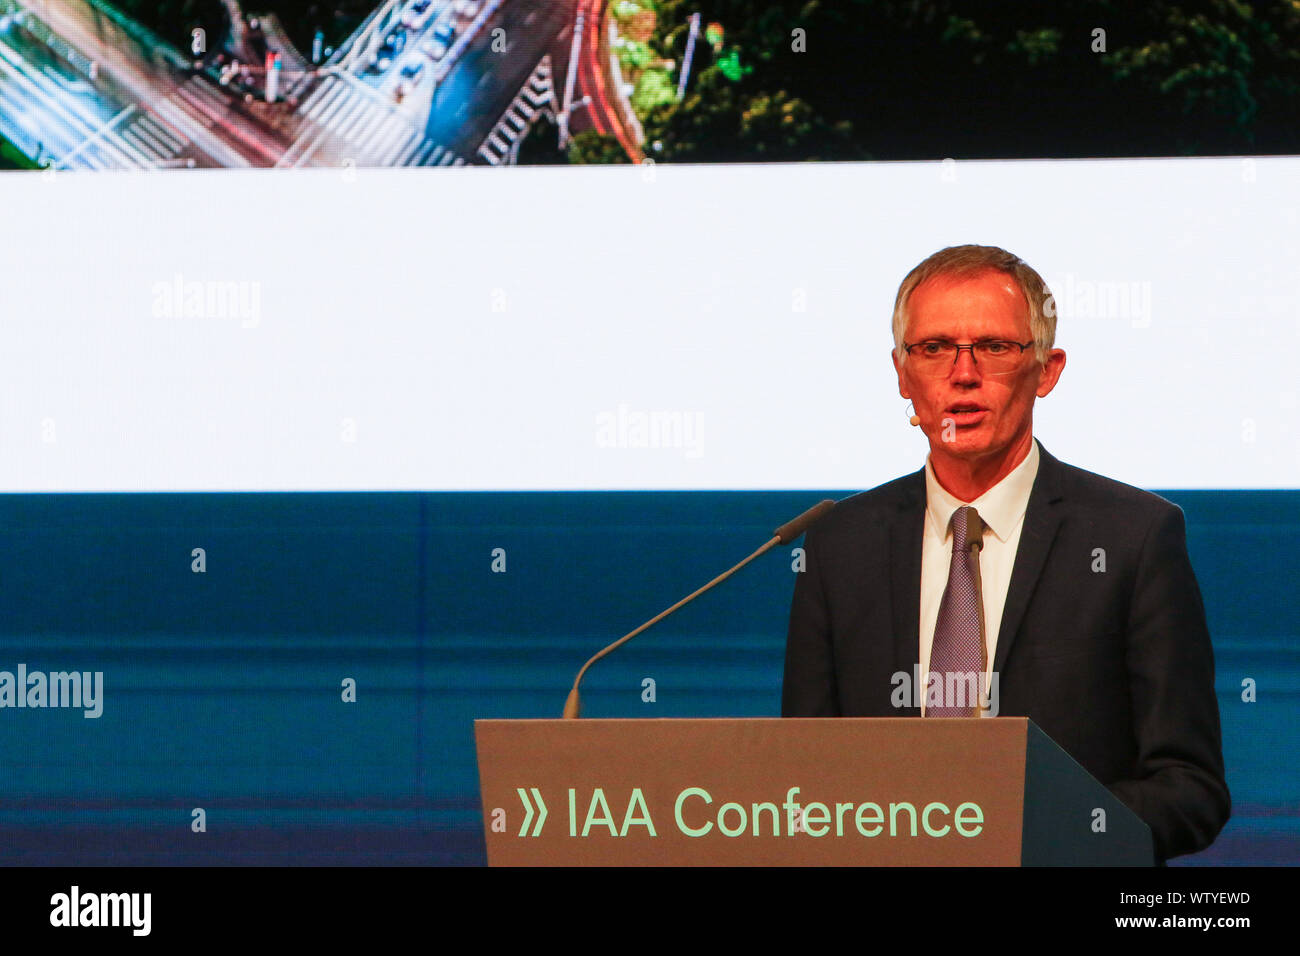 Frankfurt, Germany. 11th Sep, 2019. Carlos Tavares, the Chairman of the Managing Board of French auto manufacturer Groupe PSA (Peugeot), delivers a speech, aah the IAA Conference, which runs in parallel to the {year4 Internationale Automobil-Ausstellung (IAA). (Photo by Michael Debets/Pacific Press) Credit: Pacific Press Agency/Alamy Live News Stock Photo